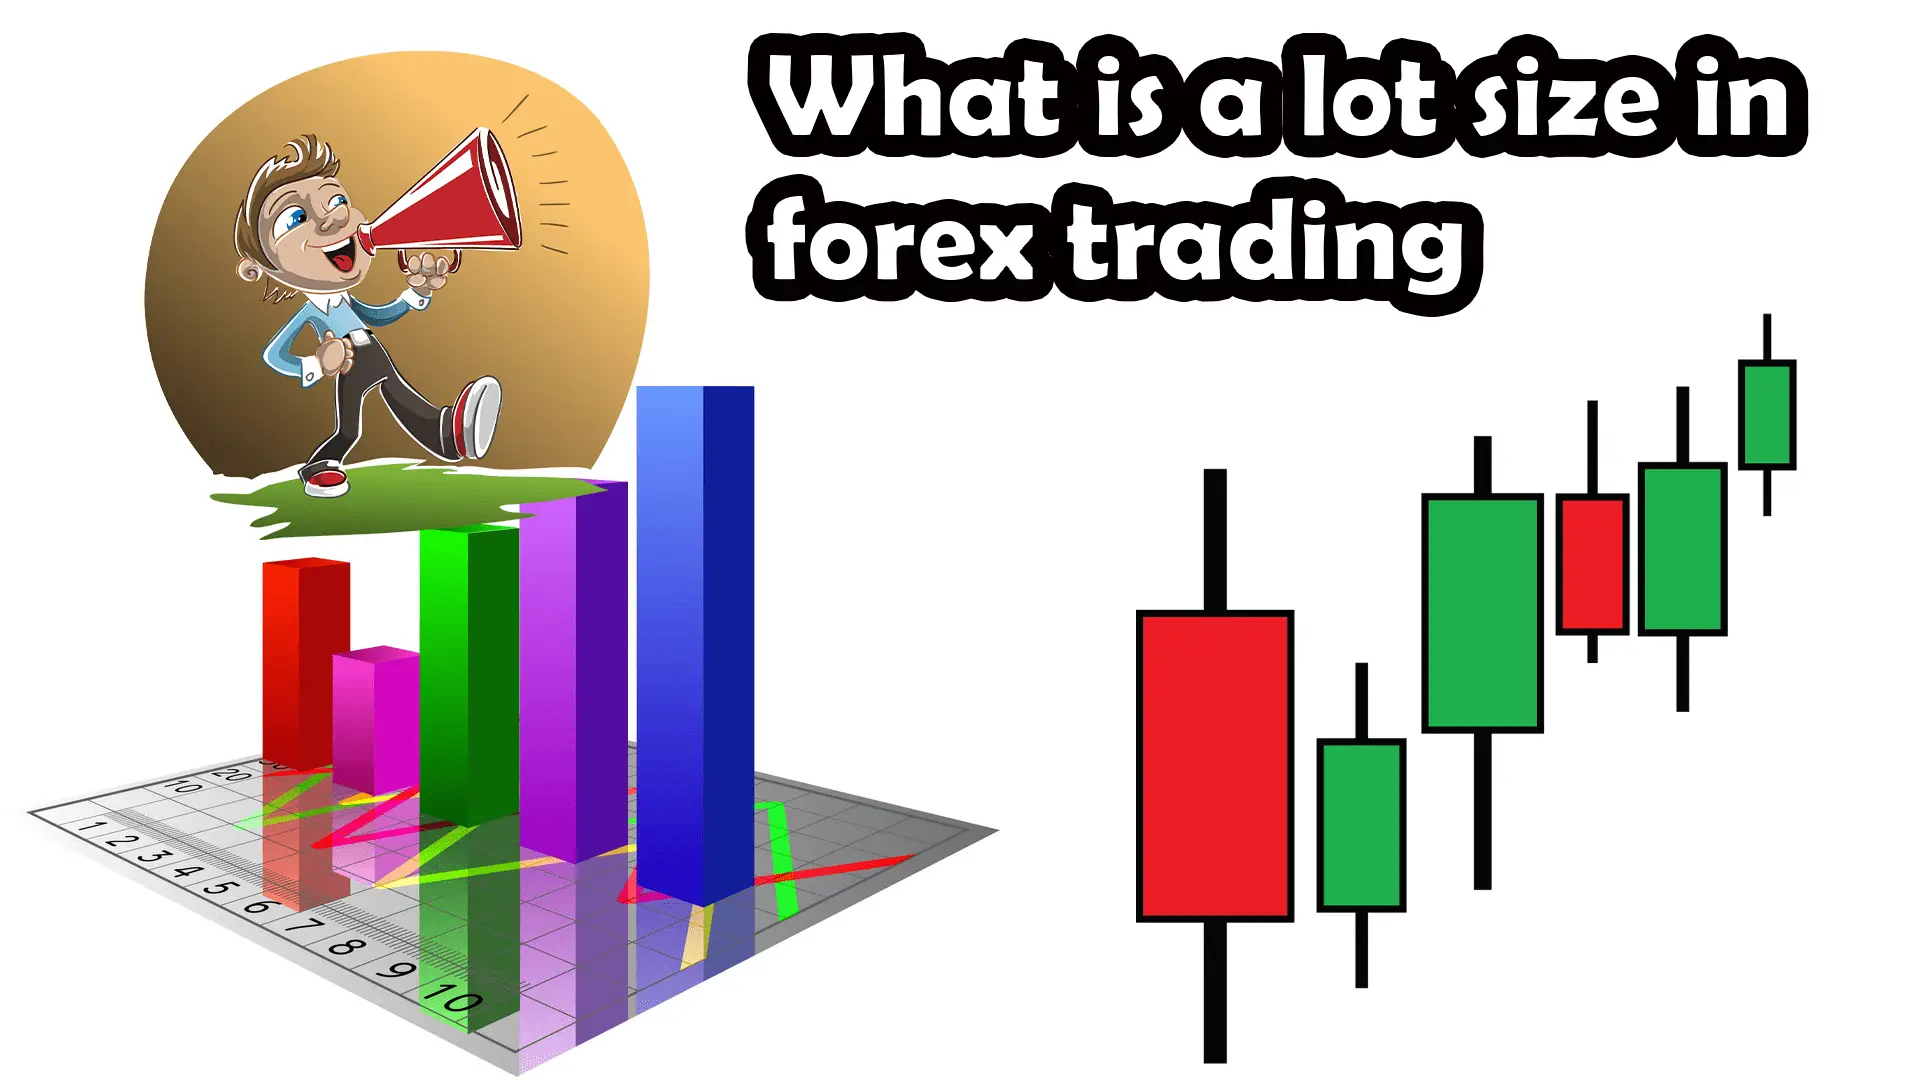 Lot size in forex trading